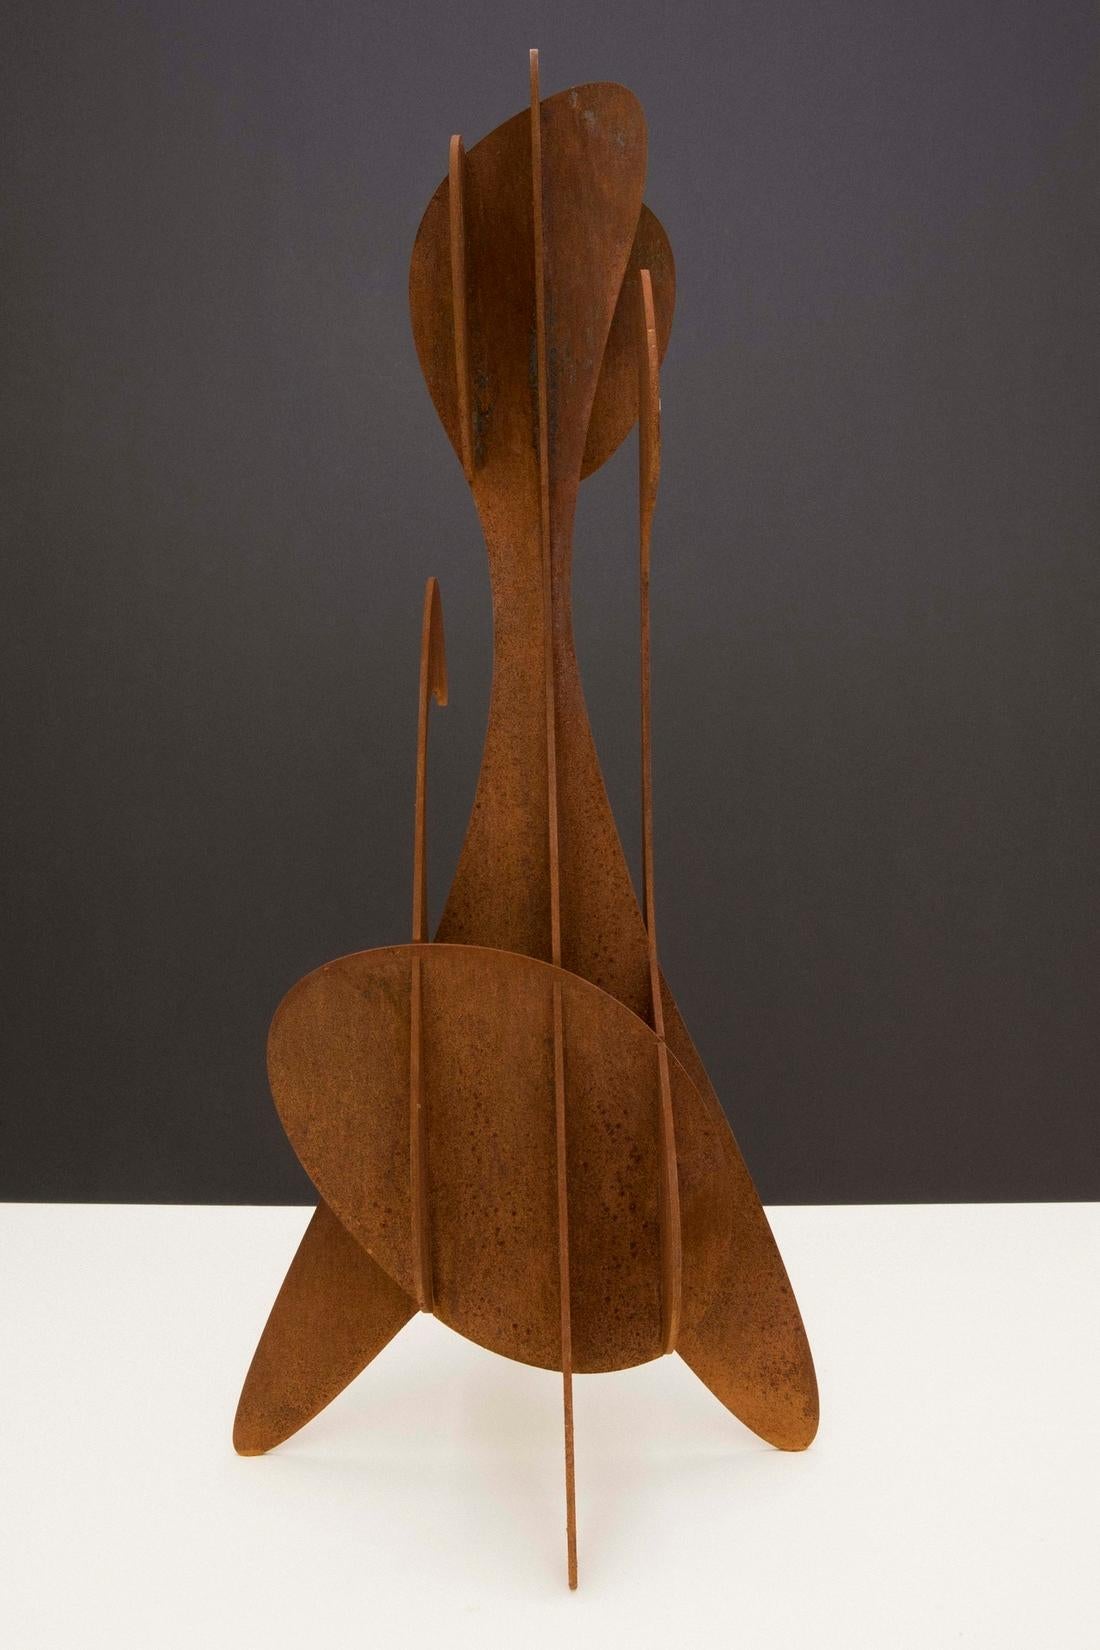 Alfil #1 by Alejandro Vega Beuvrin - Abstract sculpture, Weathering steel For Sale 2